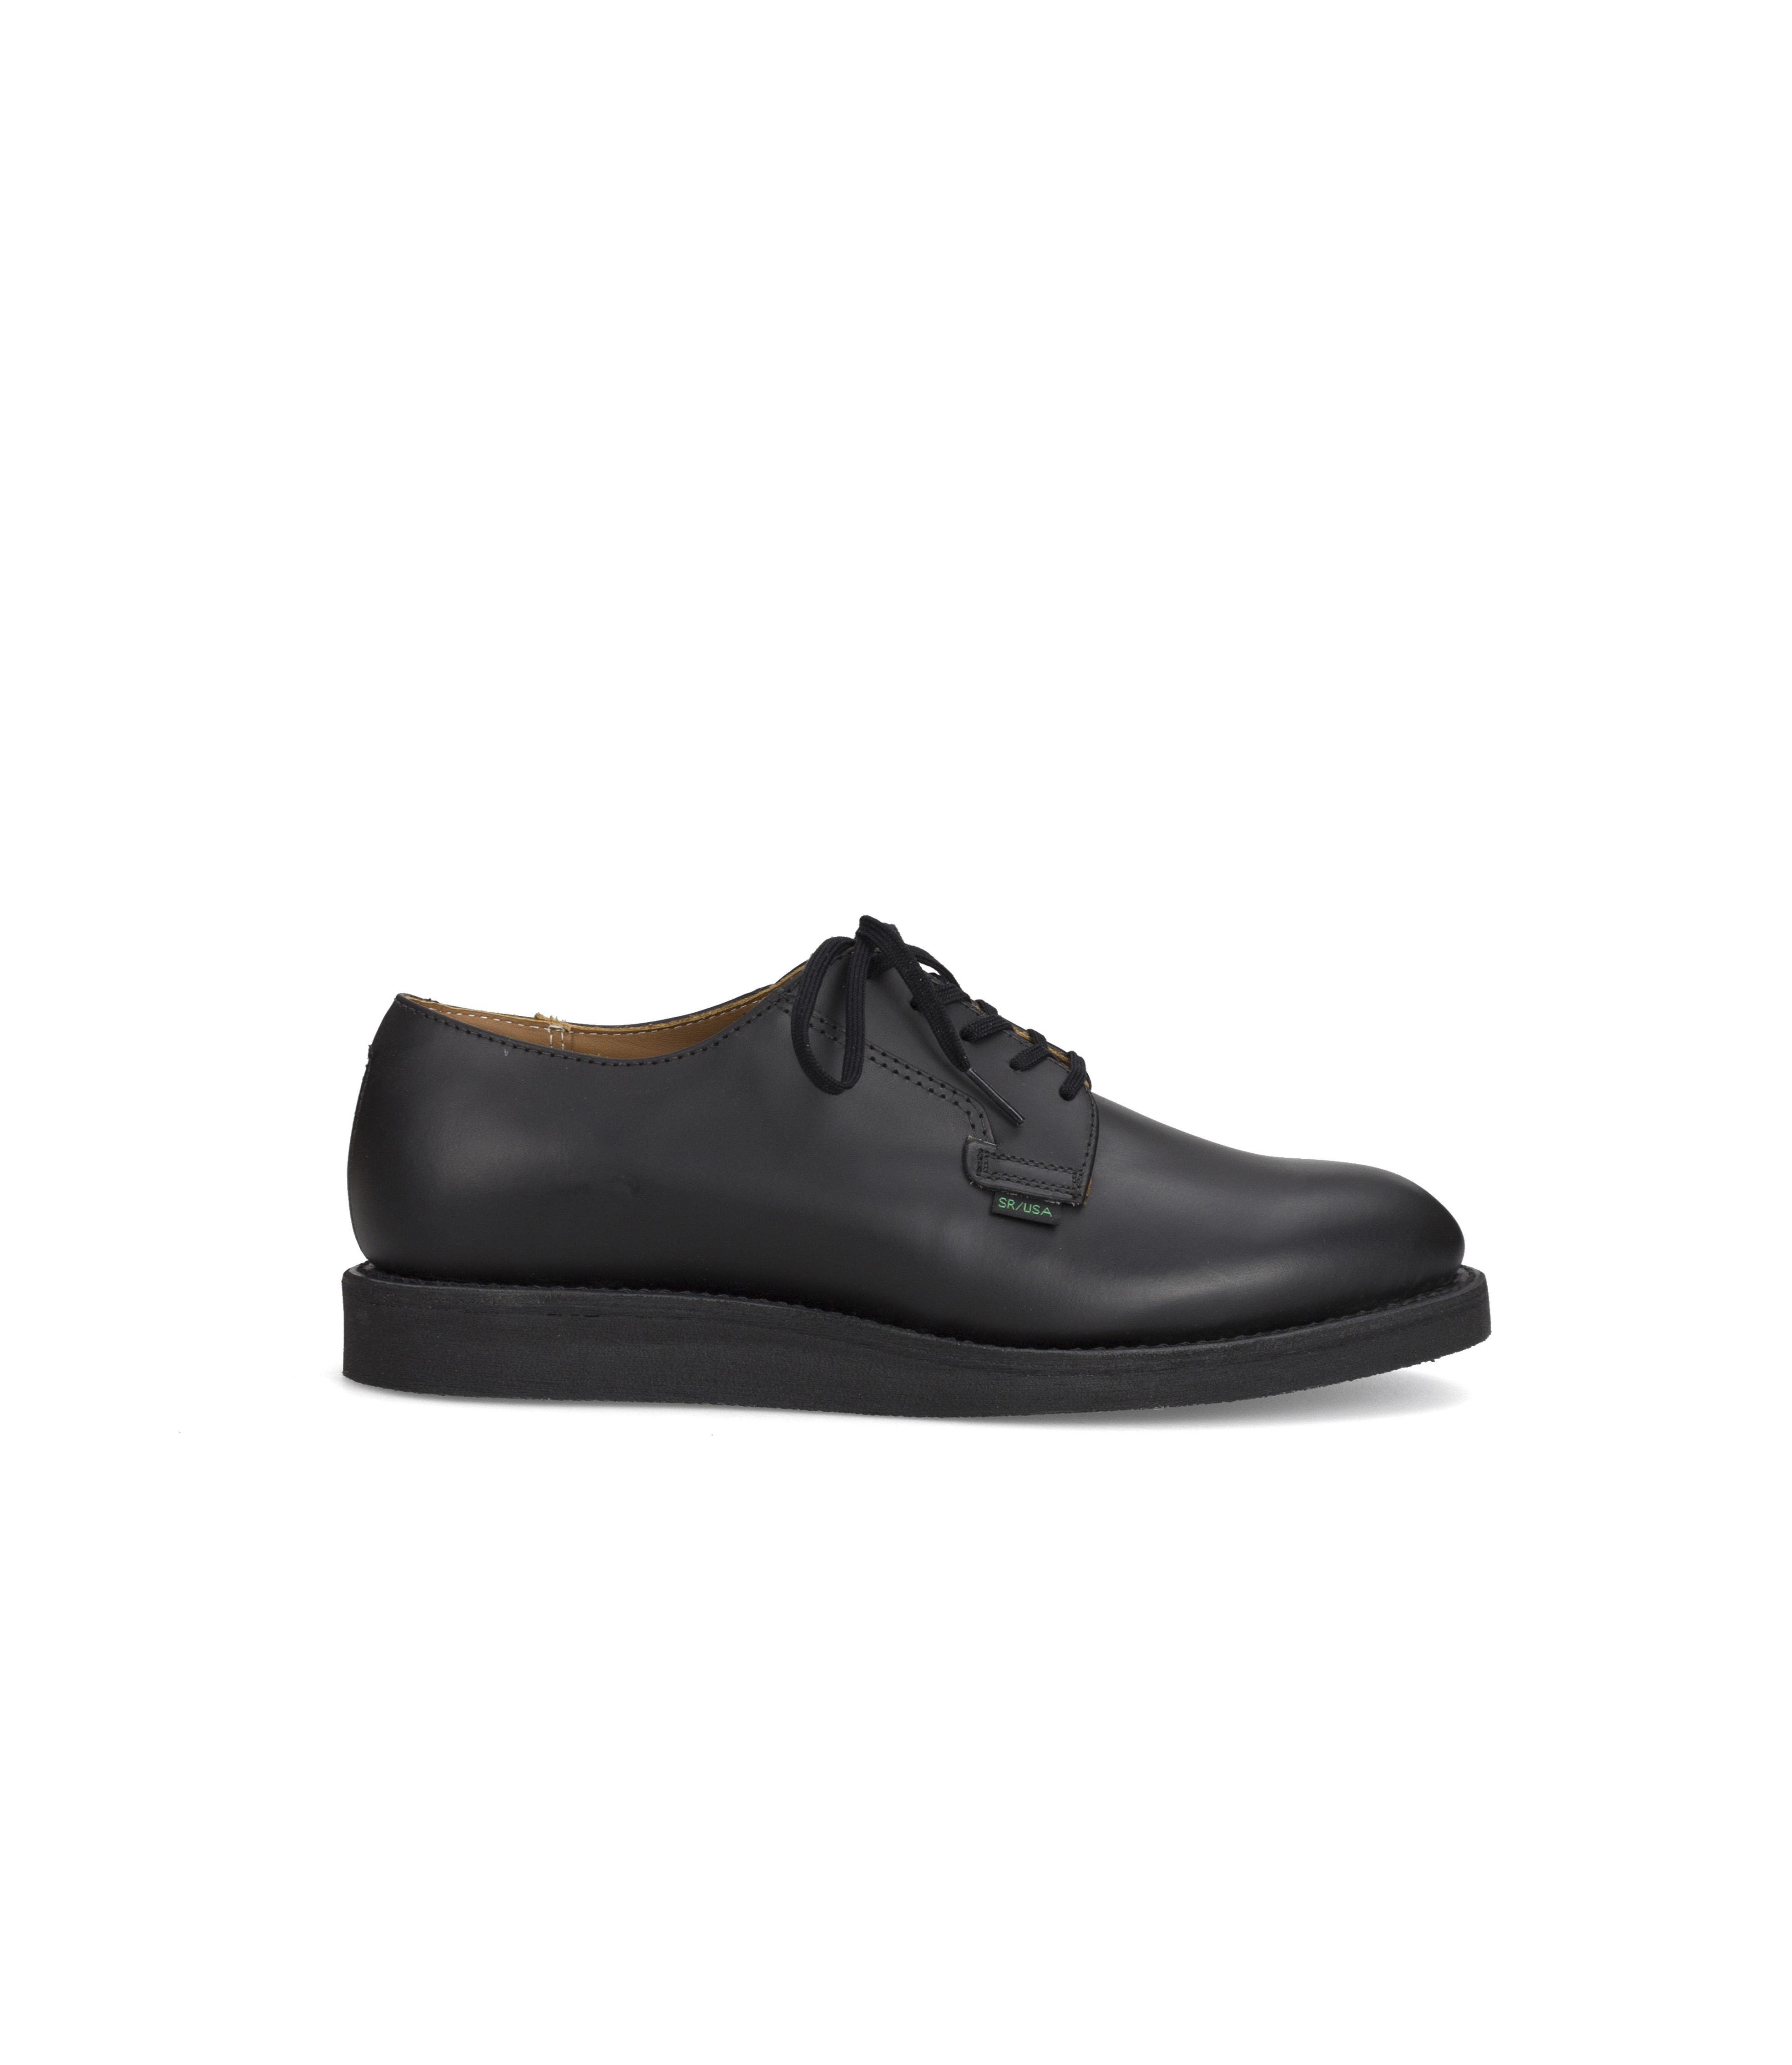 Shop Red Wing 101 Postman Oxford Black Chaparral at ITK online store